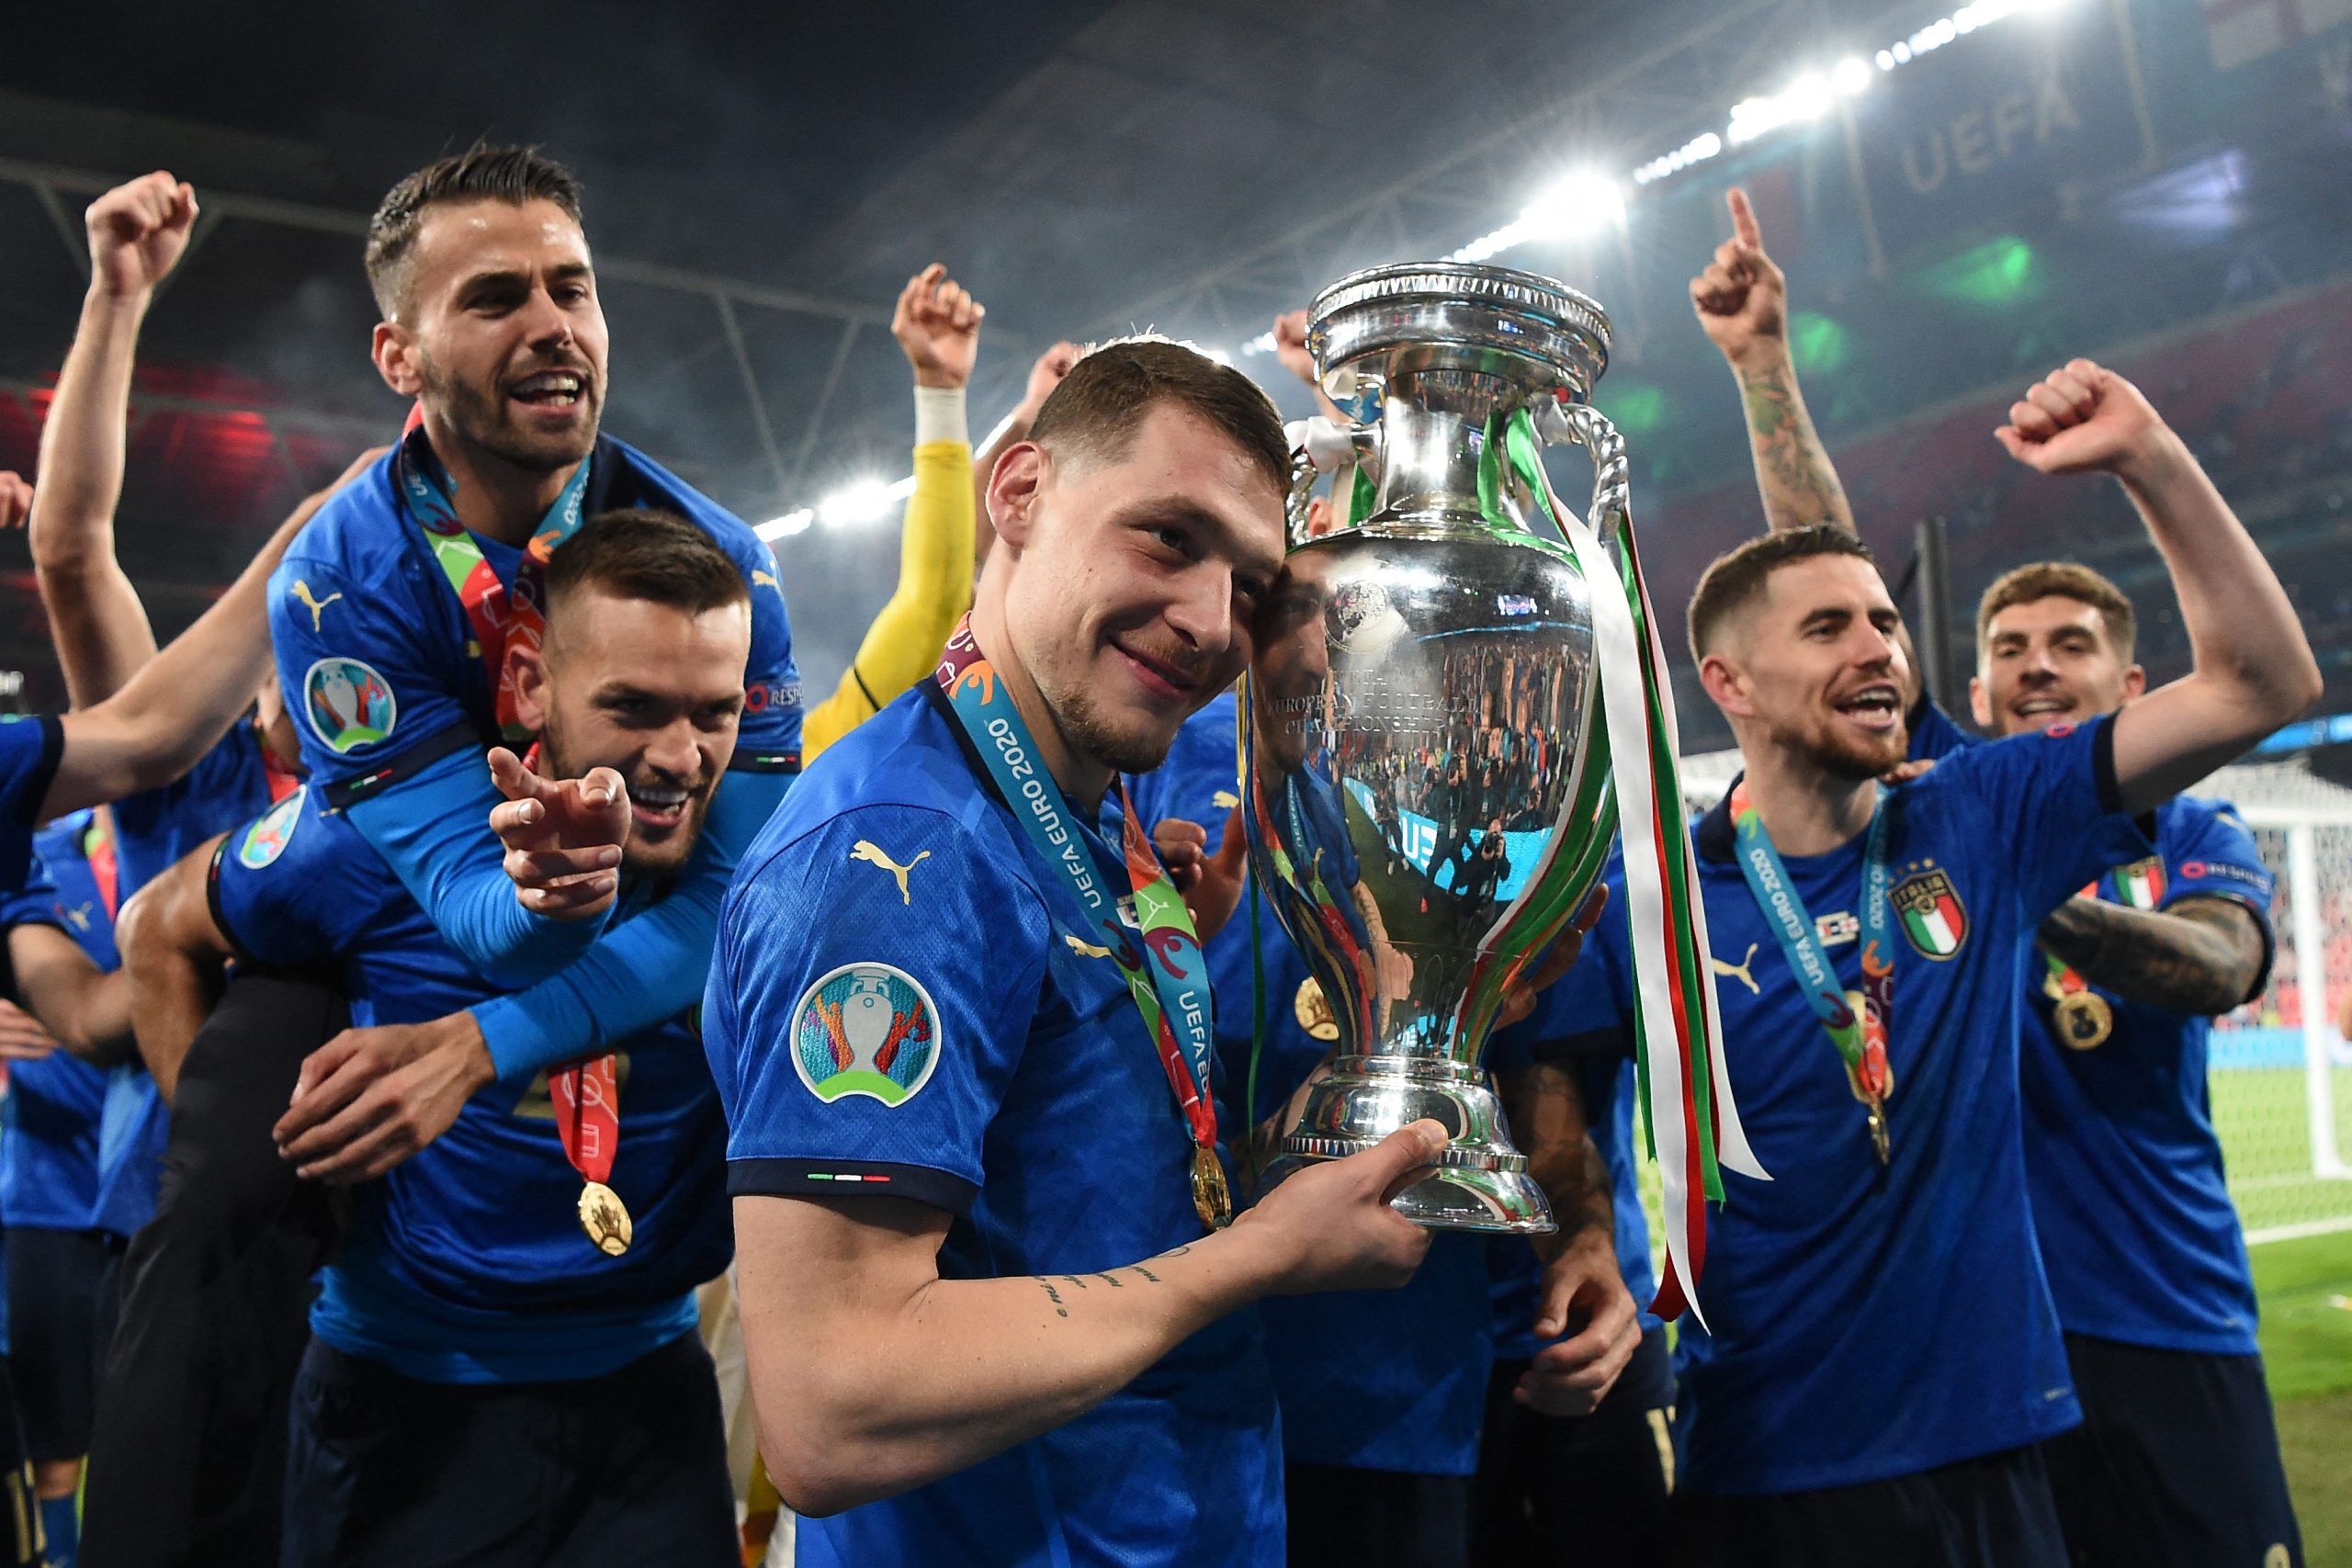 Euro 2020 final: Italy beat England 3-2 on penalties to lift 2nd title